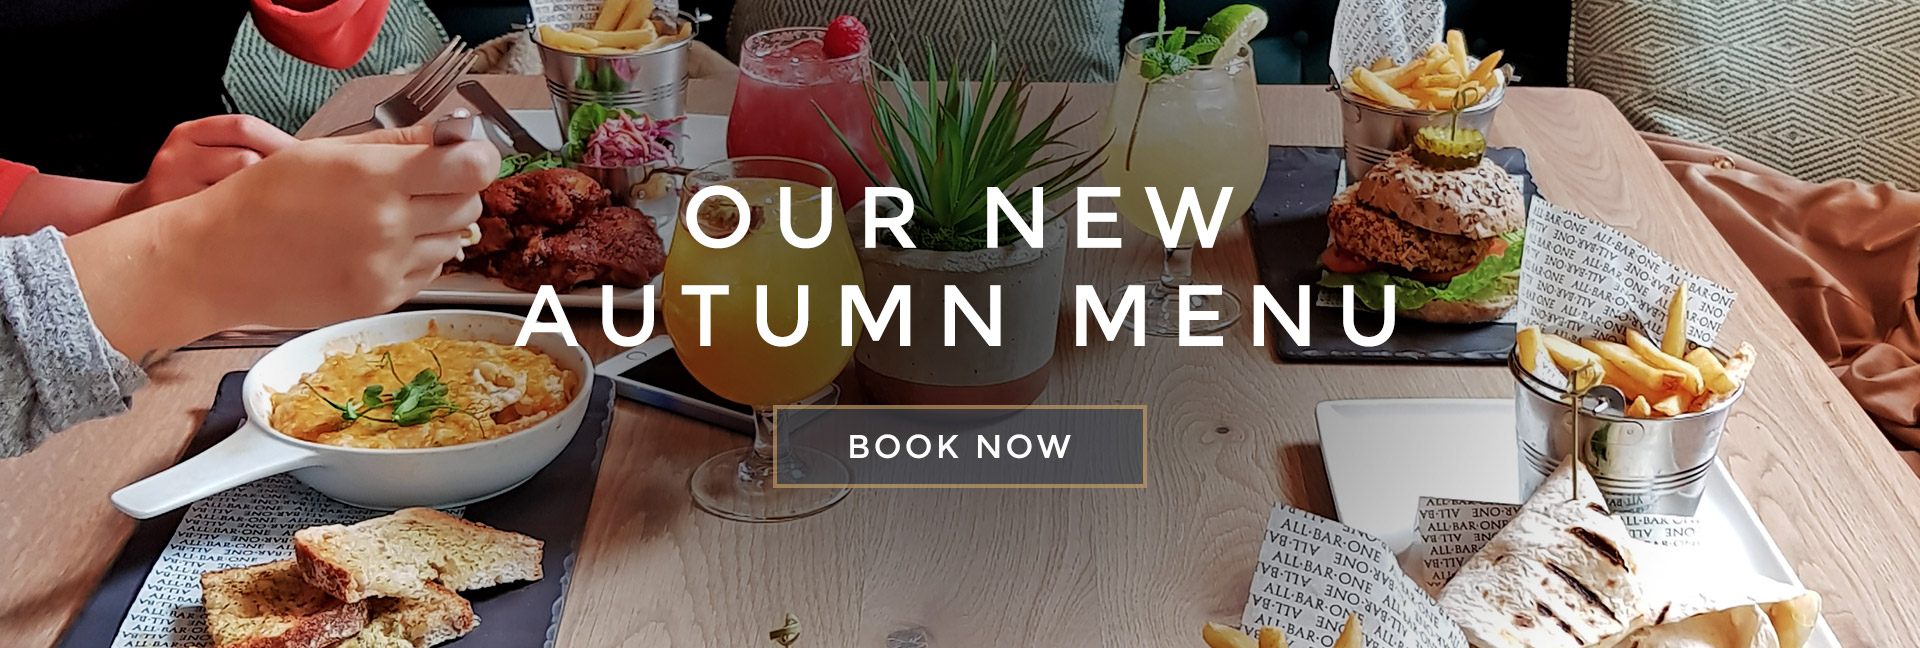 Our new Autumn menu at All Bar One Victoria - Book now